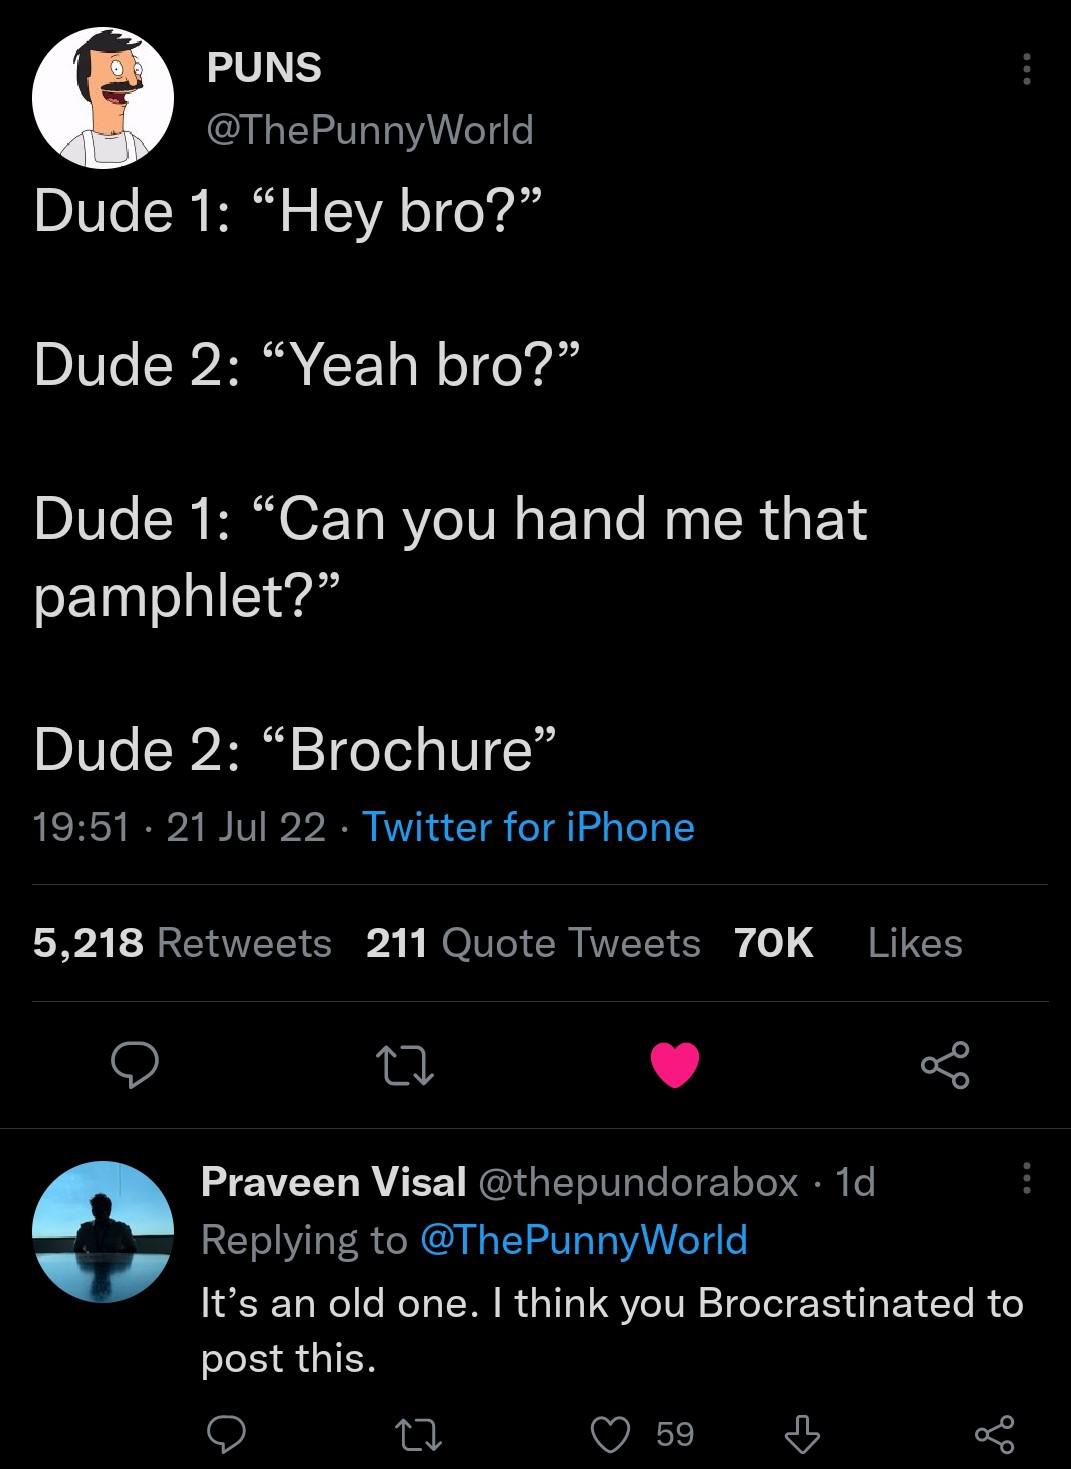 a tweet that says:
dude 1: "hey bro?"
dude 2: "yeah broh?"
dude 1: "can you hand me that pamphlet?"
dude 2: "brochure"

and a comment on that tweet that says "it's an old one. i think you brocrastinated to post this."